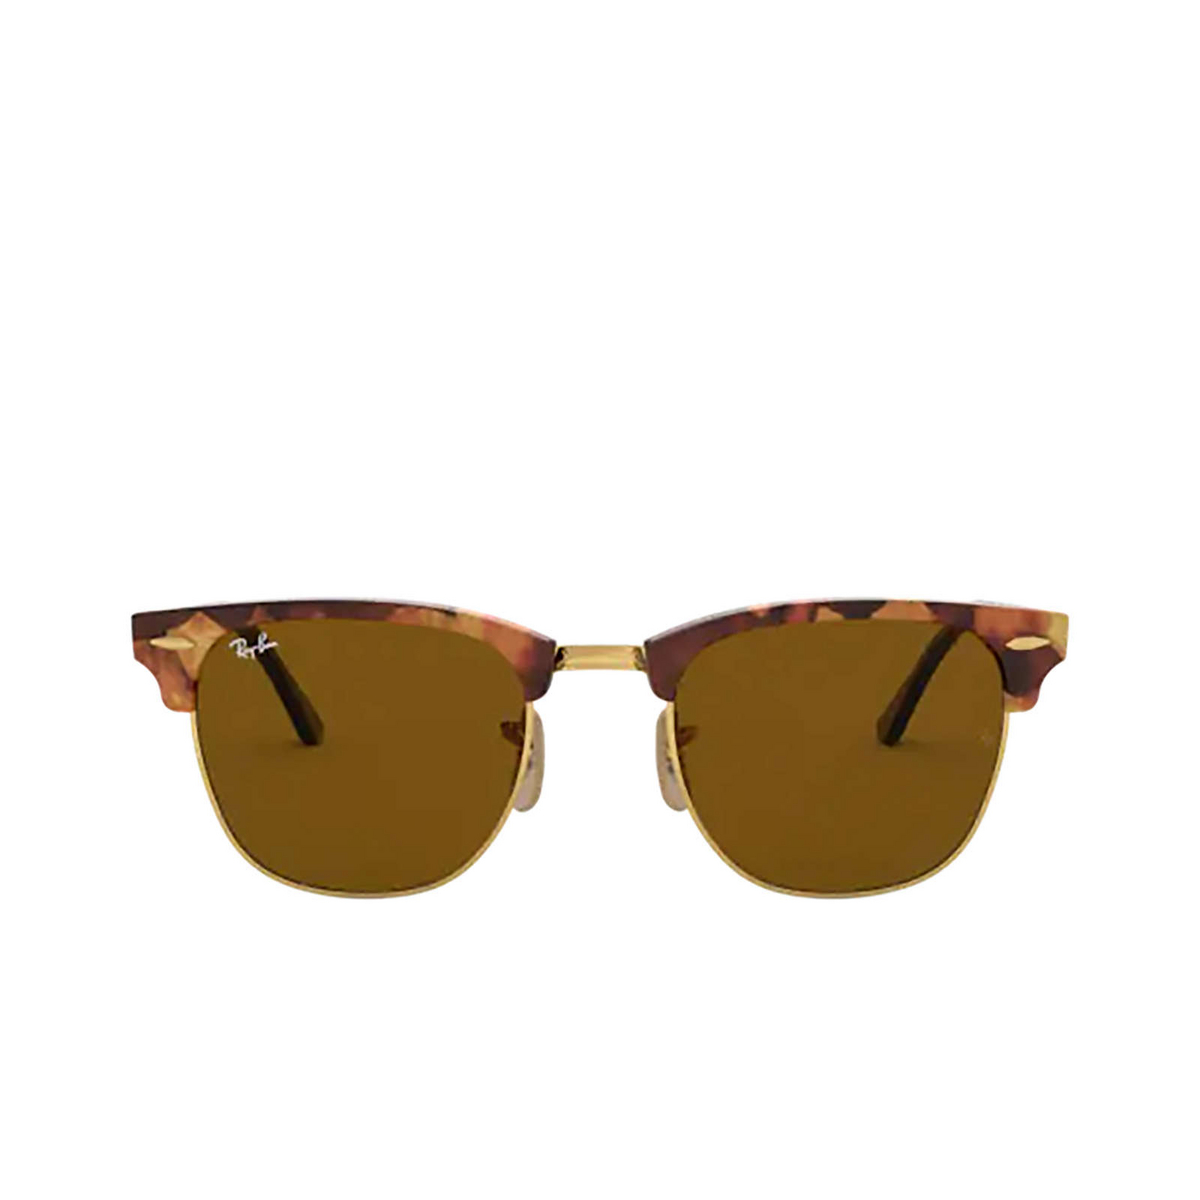 Ray-Ban CLUBMASTER Sunglasses 1160 Spotted Brown Havana - front view